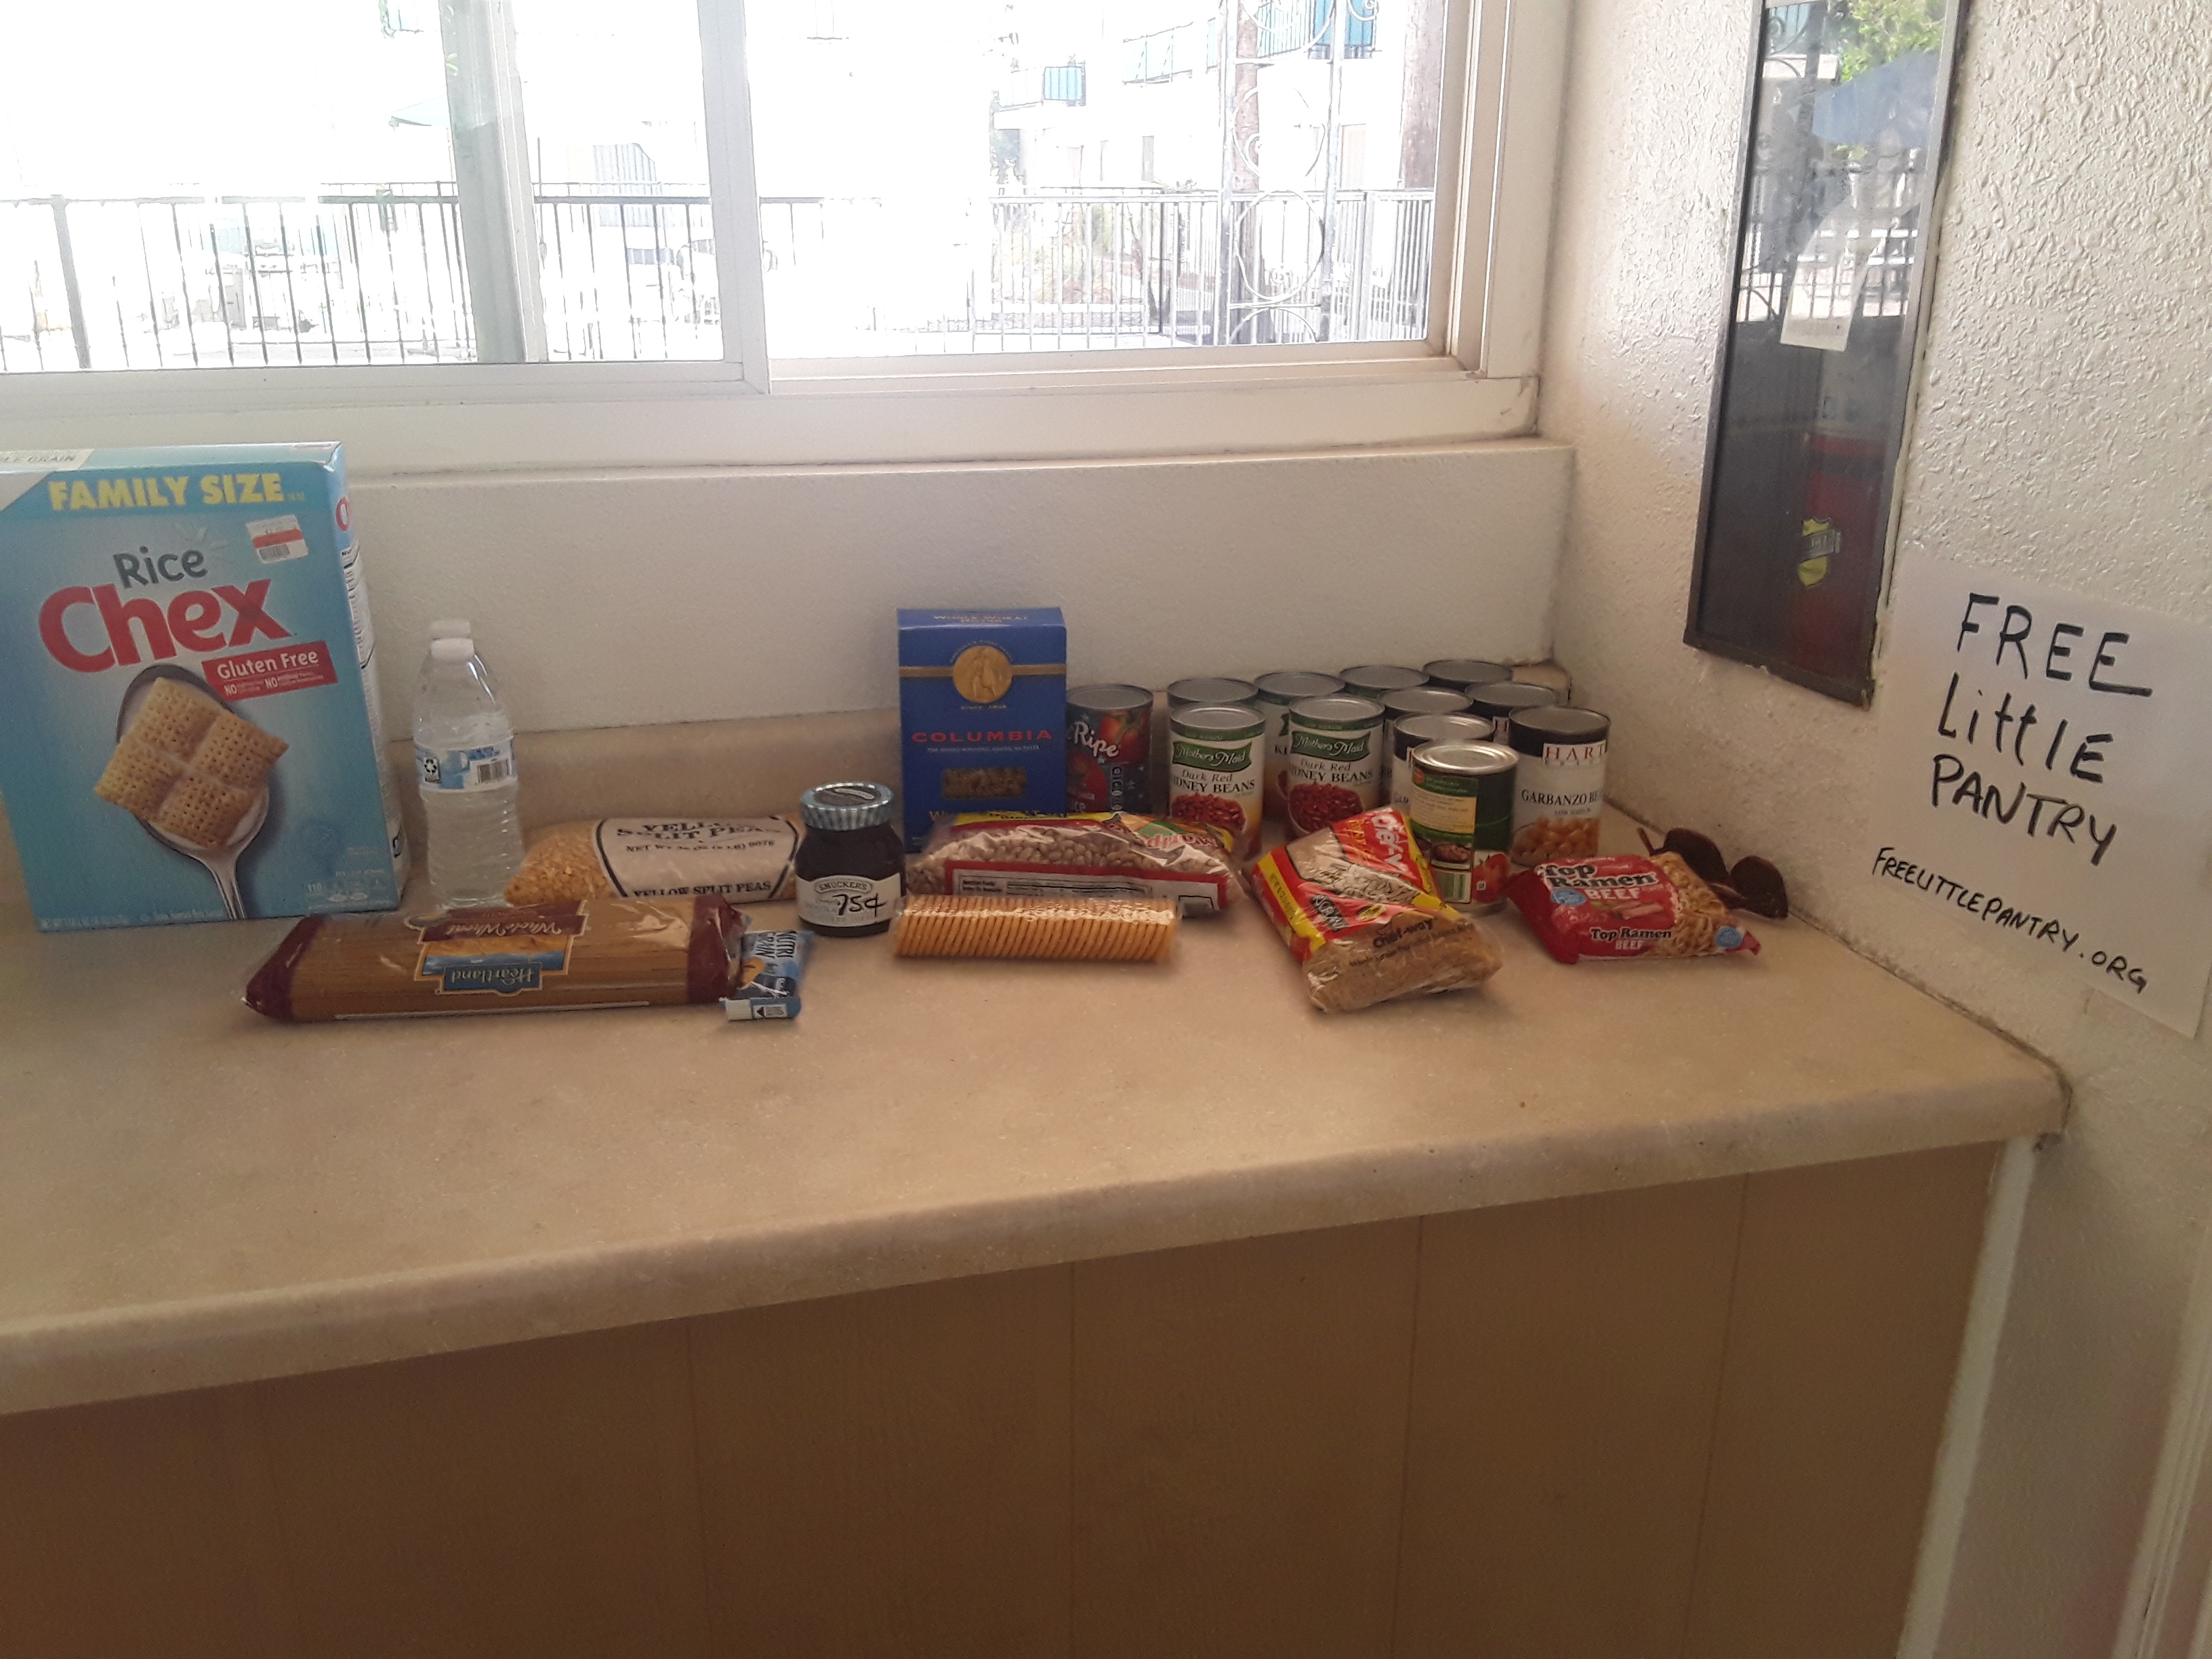 The Little Free Pantry Photo 1